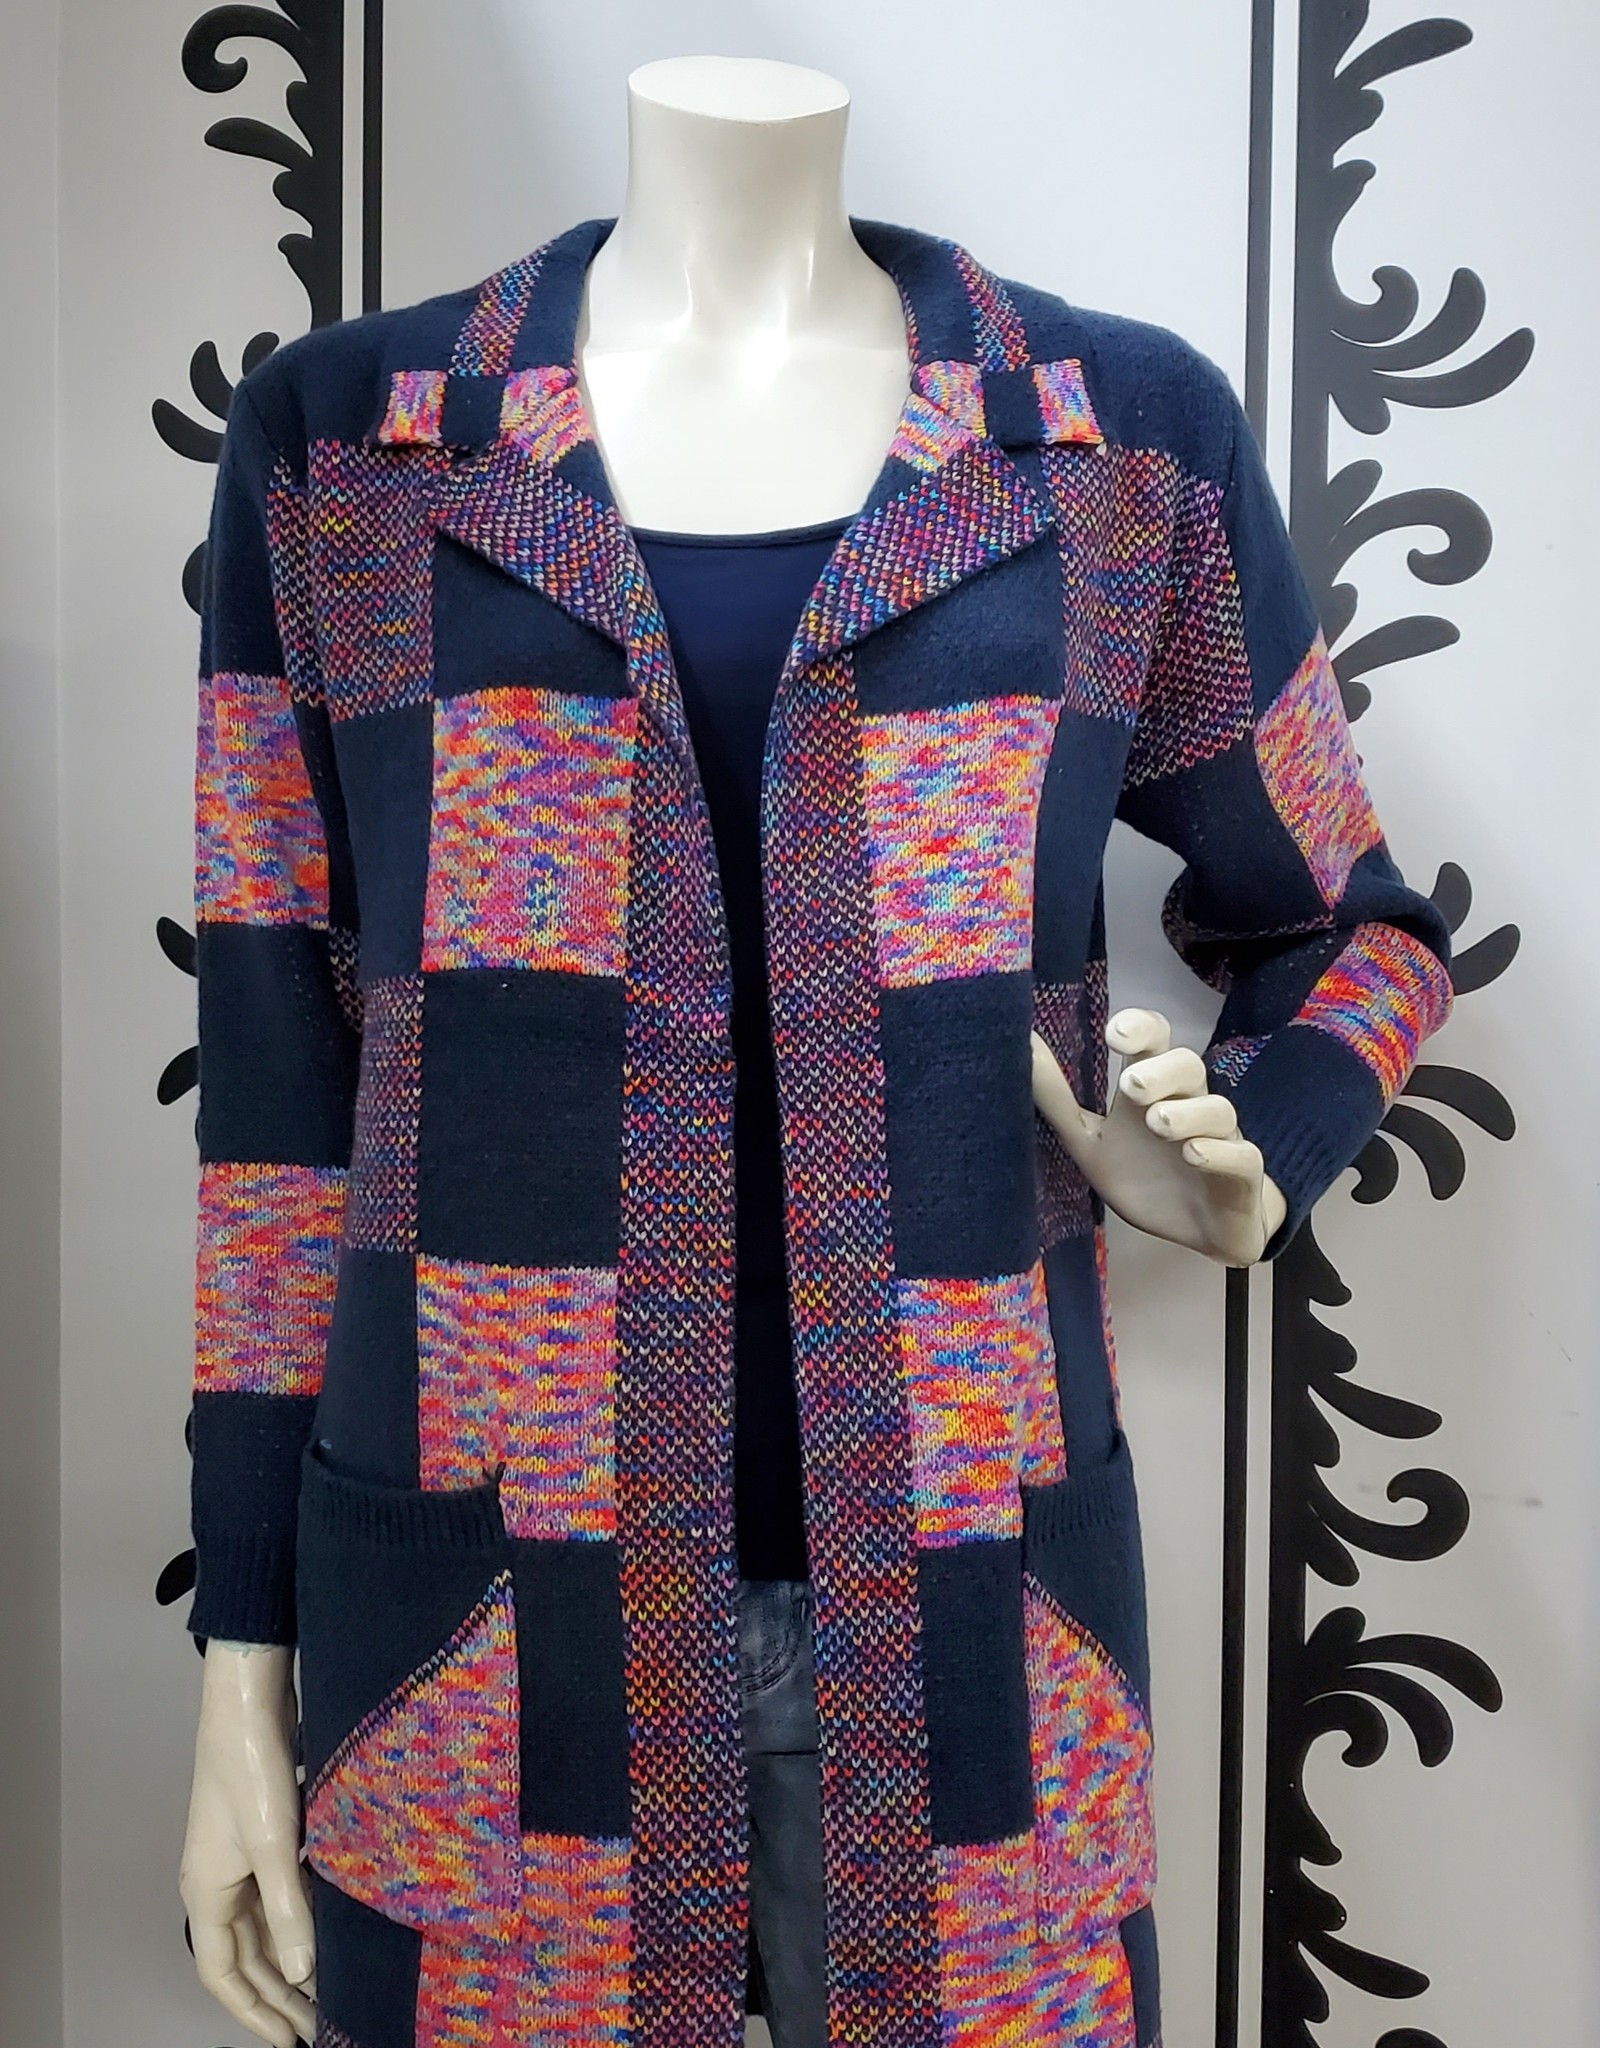 91500 Ladies Knit Multi Colour Cardigan with Large Front Pockets and Collar